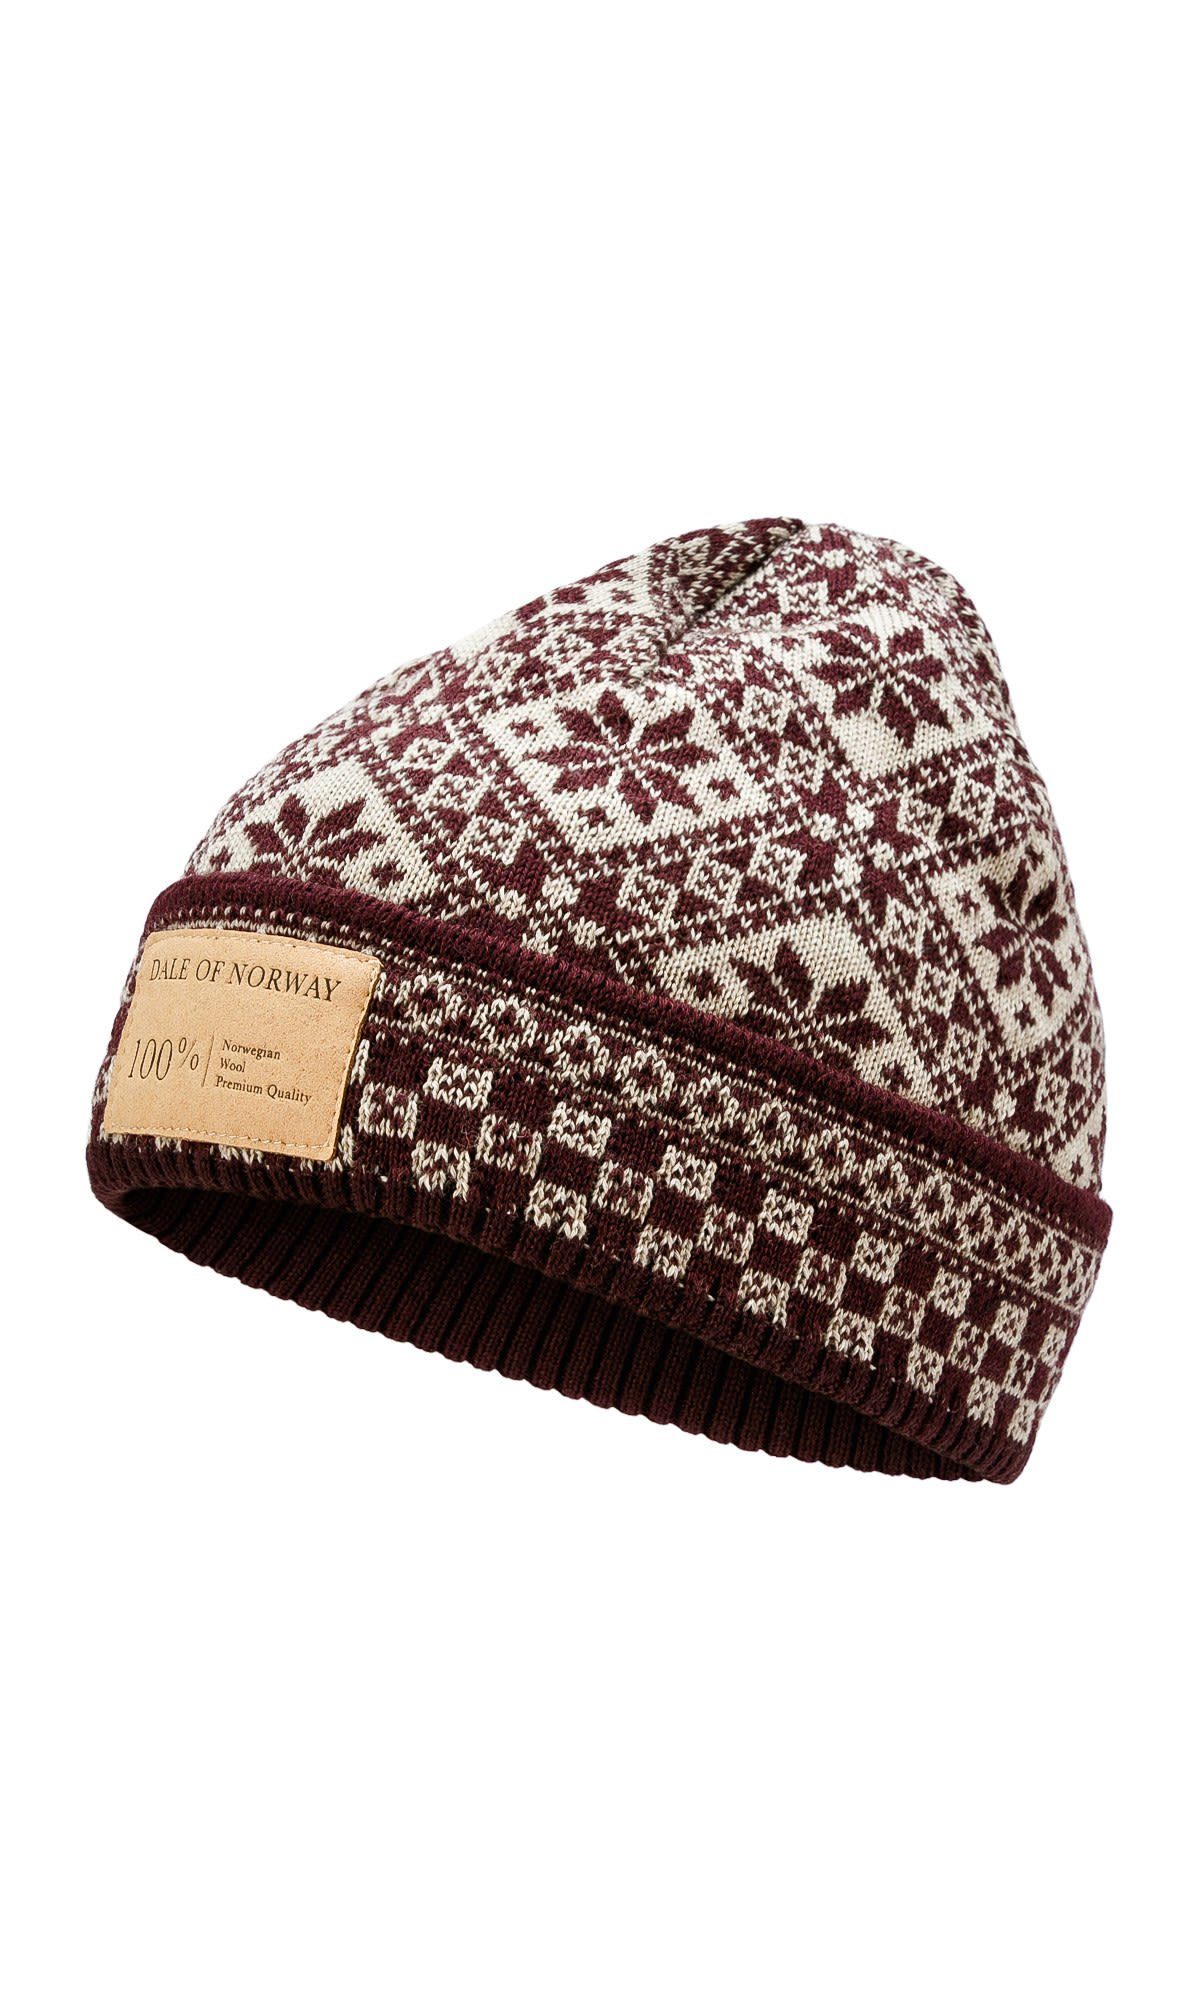 Accessoires Dale Norway Bjoroy Sand Of Hat Dale of Norway Beanie Aubergine